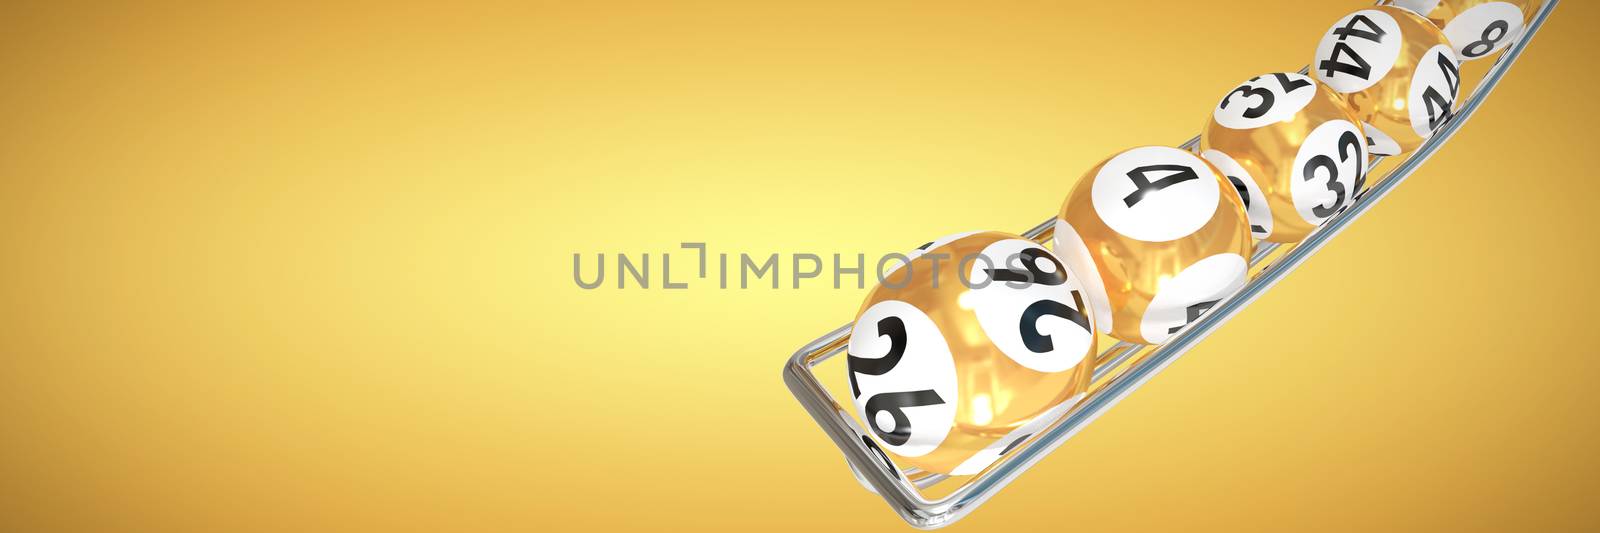 Balls of the lottery  against abstract yellow background